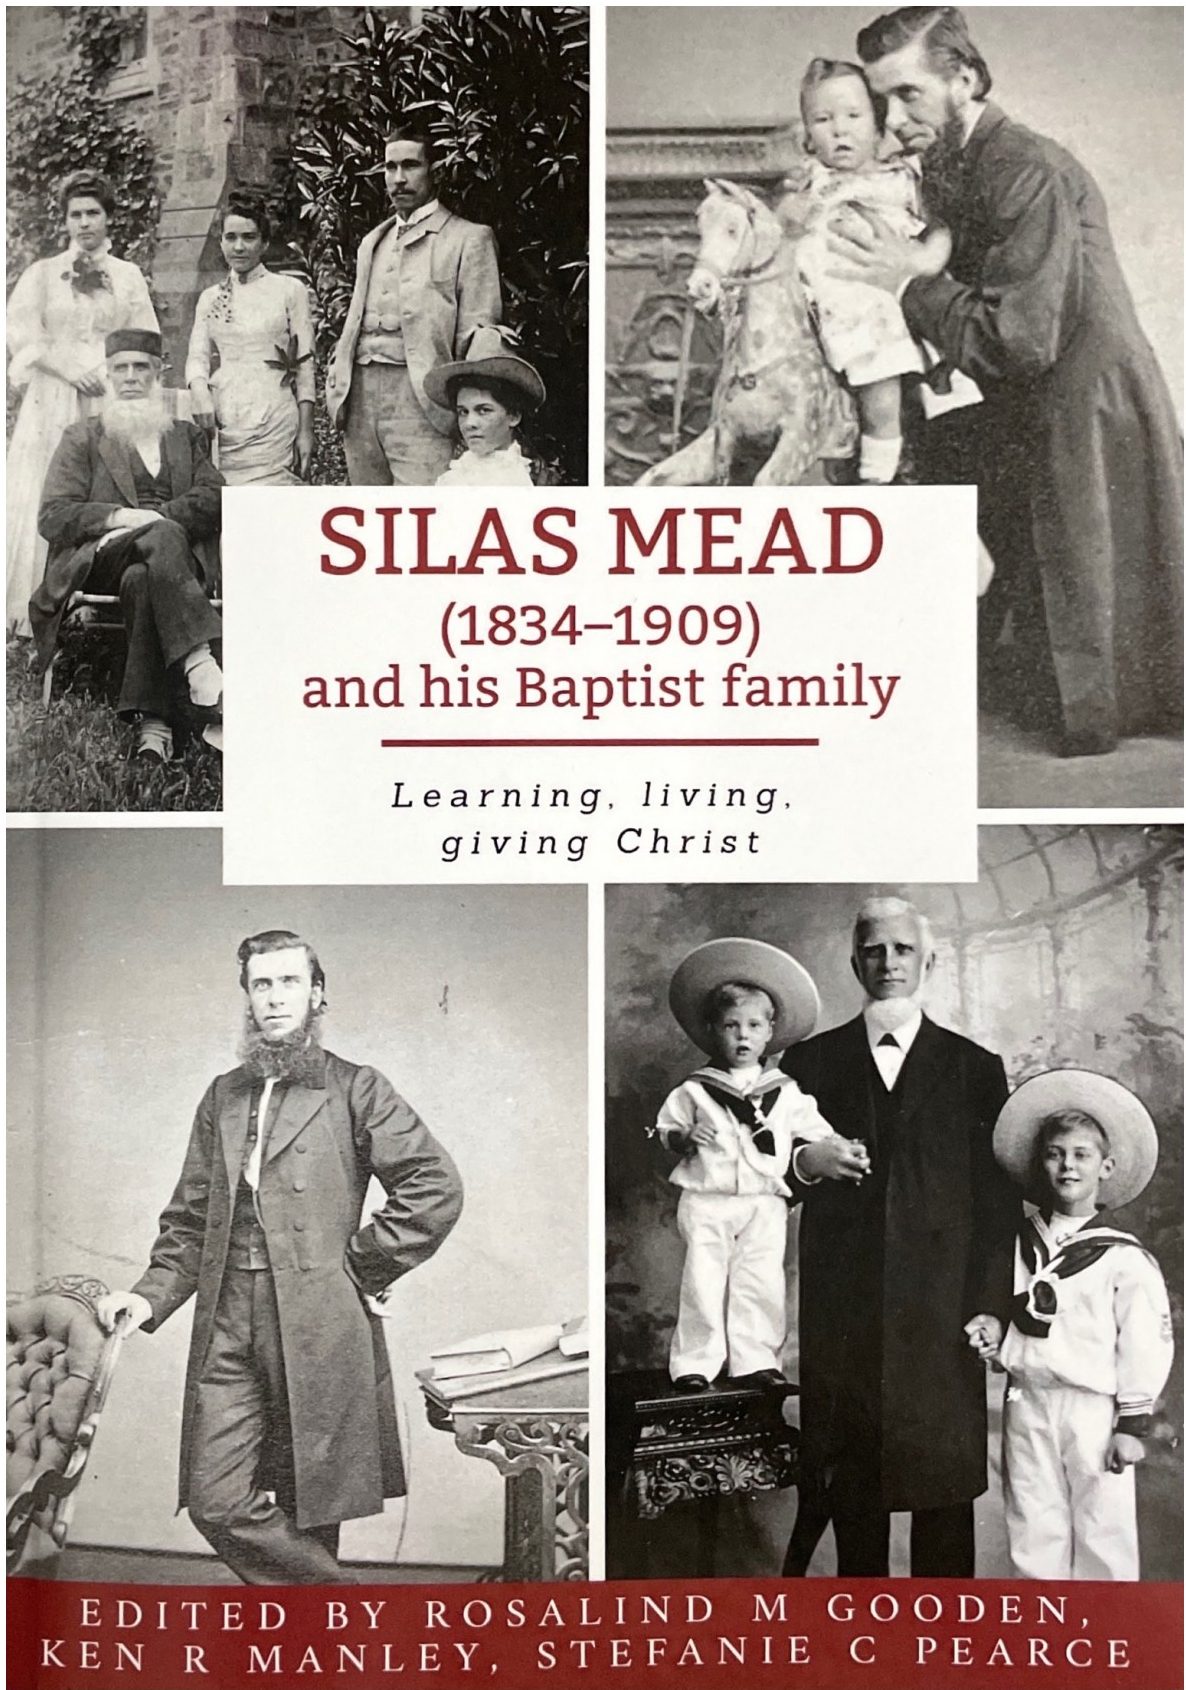 Book Launch: Silas Mead (1834-1909) and his Baptist Family